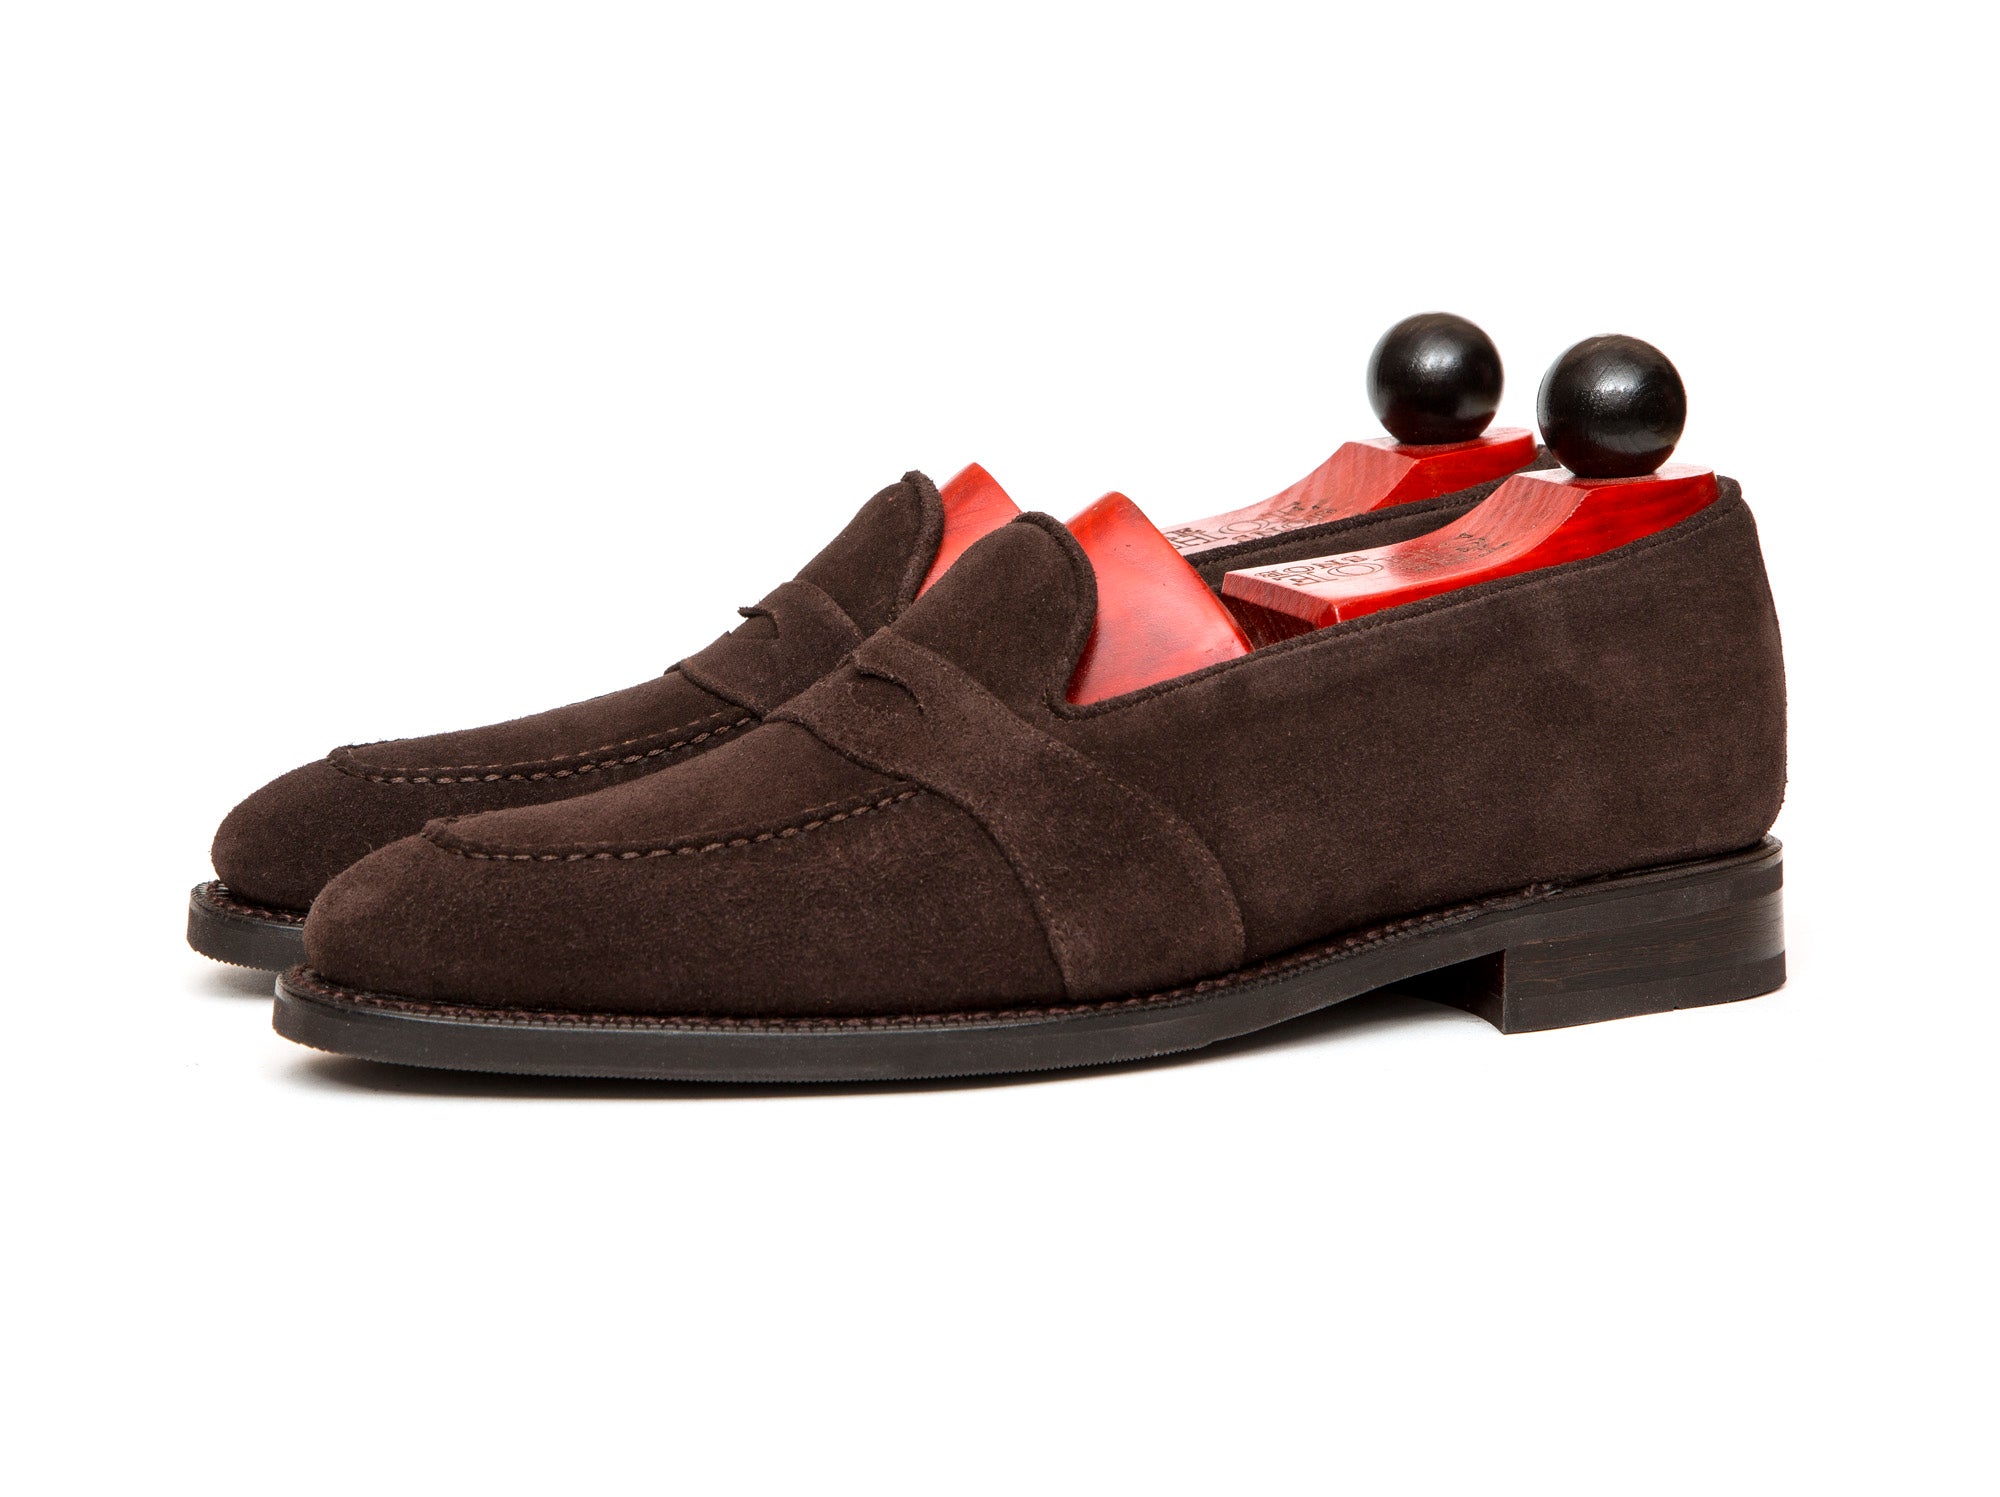 Madison - MTO - Bitter Chocolate Suede - LPB Last - City Rubber Sole